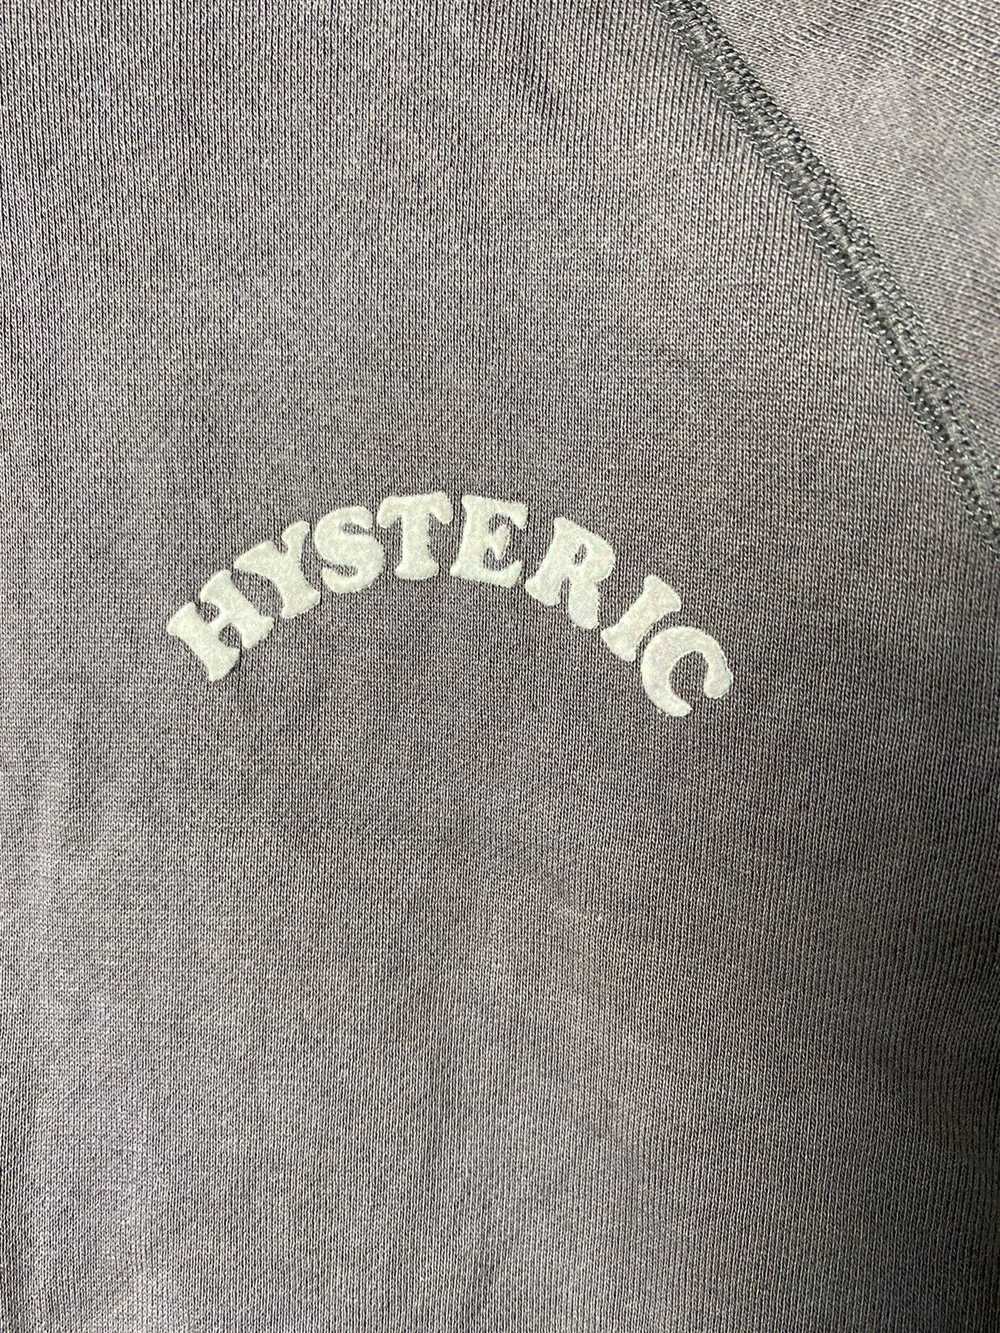 Hysteric Glamour × Japanese Brand × Vintage Hyste… - image 5